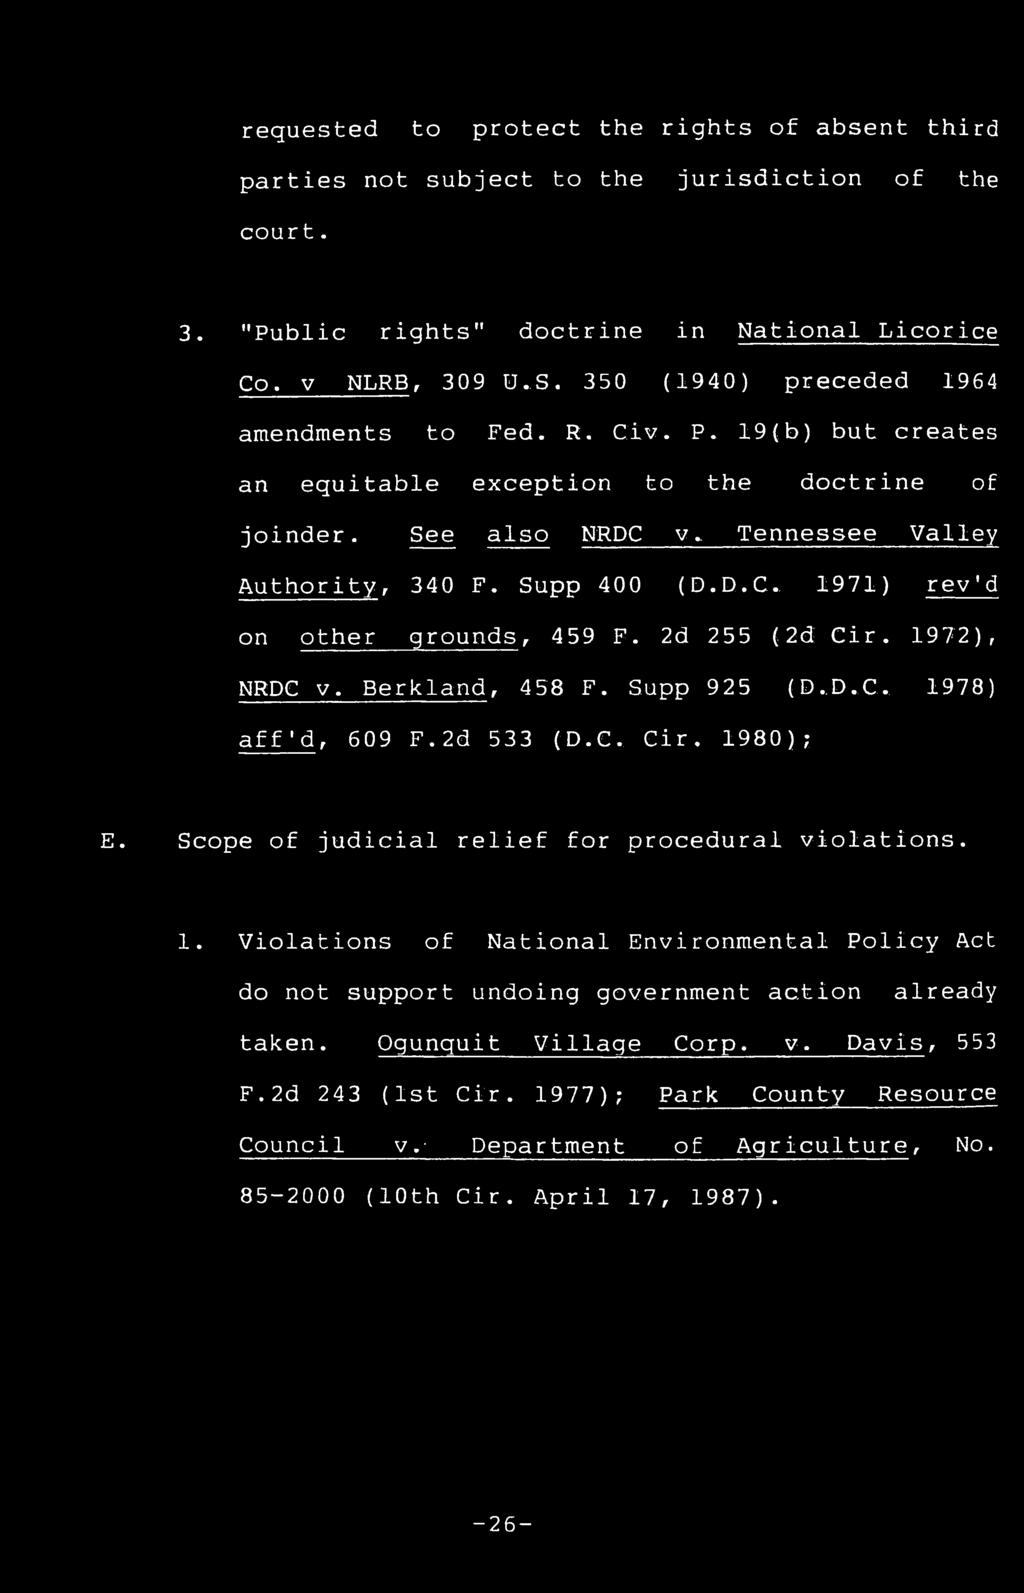 2d 255 (2d Cir. 1972), NRDC v. Berkland, 458 F. Supp 925 (D.D.C. 1978) aff'd,609 F.2d 533 (D.C. Cir. 1980); E. Scope of judicial relief for procedural violations. 1. Violations of National Environmental Policy Act do not support undoing government action already taken.